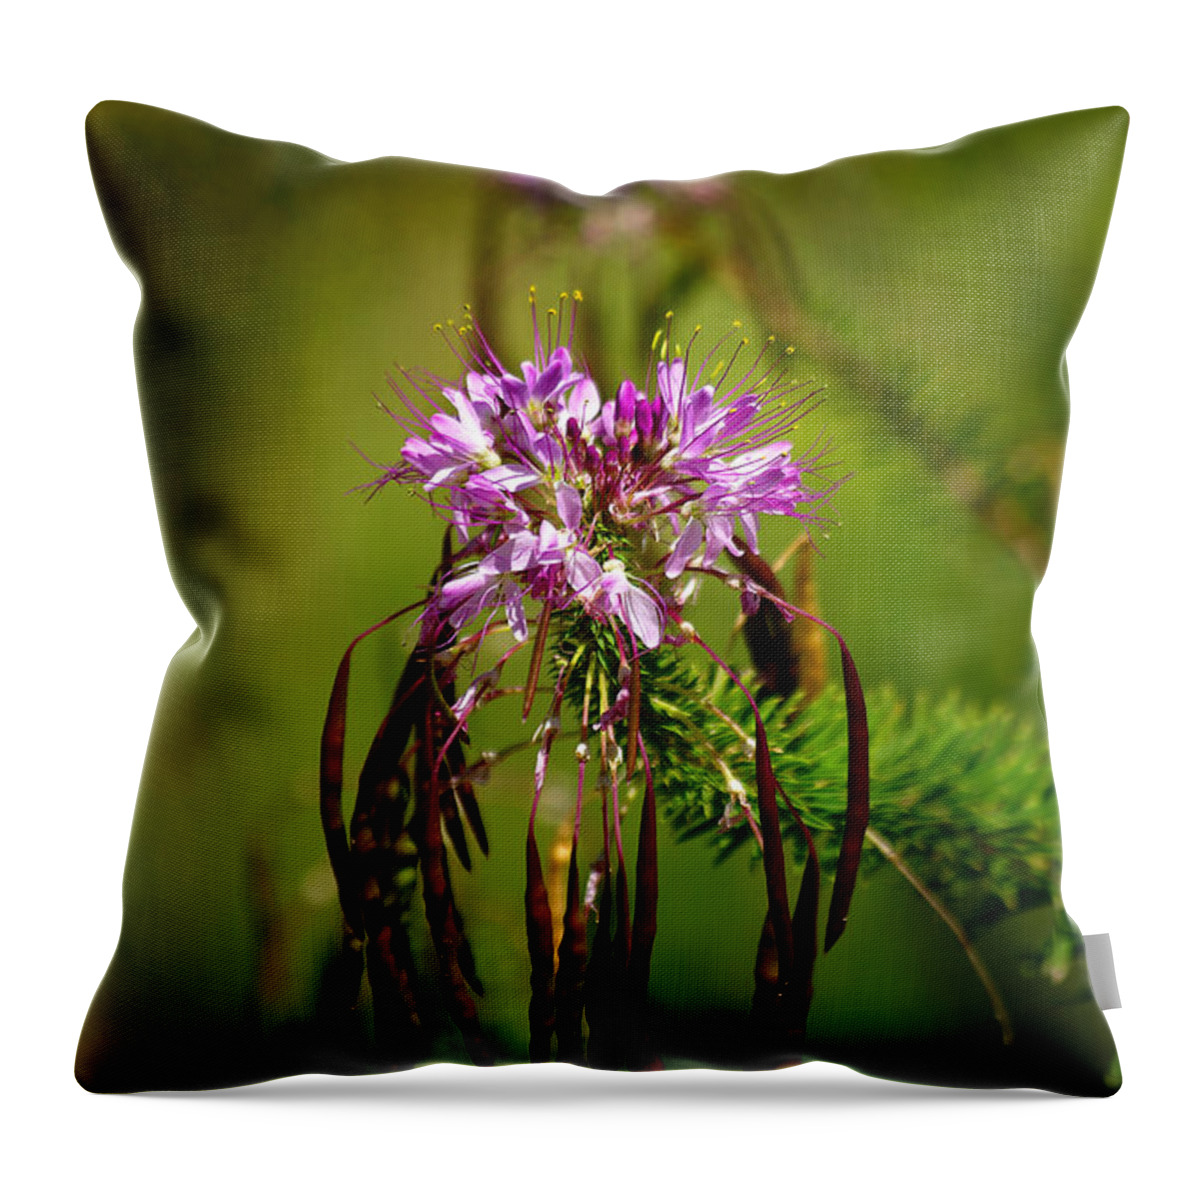 Lava Beds Throw Pillow featuring the photograph Purple Pizzazz by Vicki Pelham